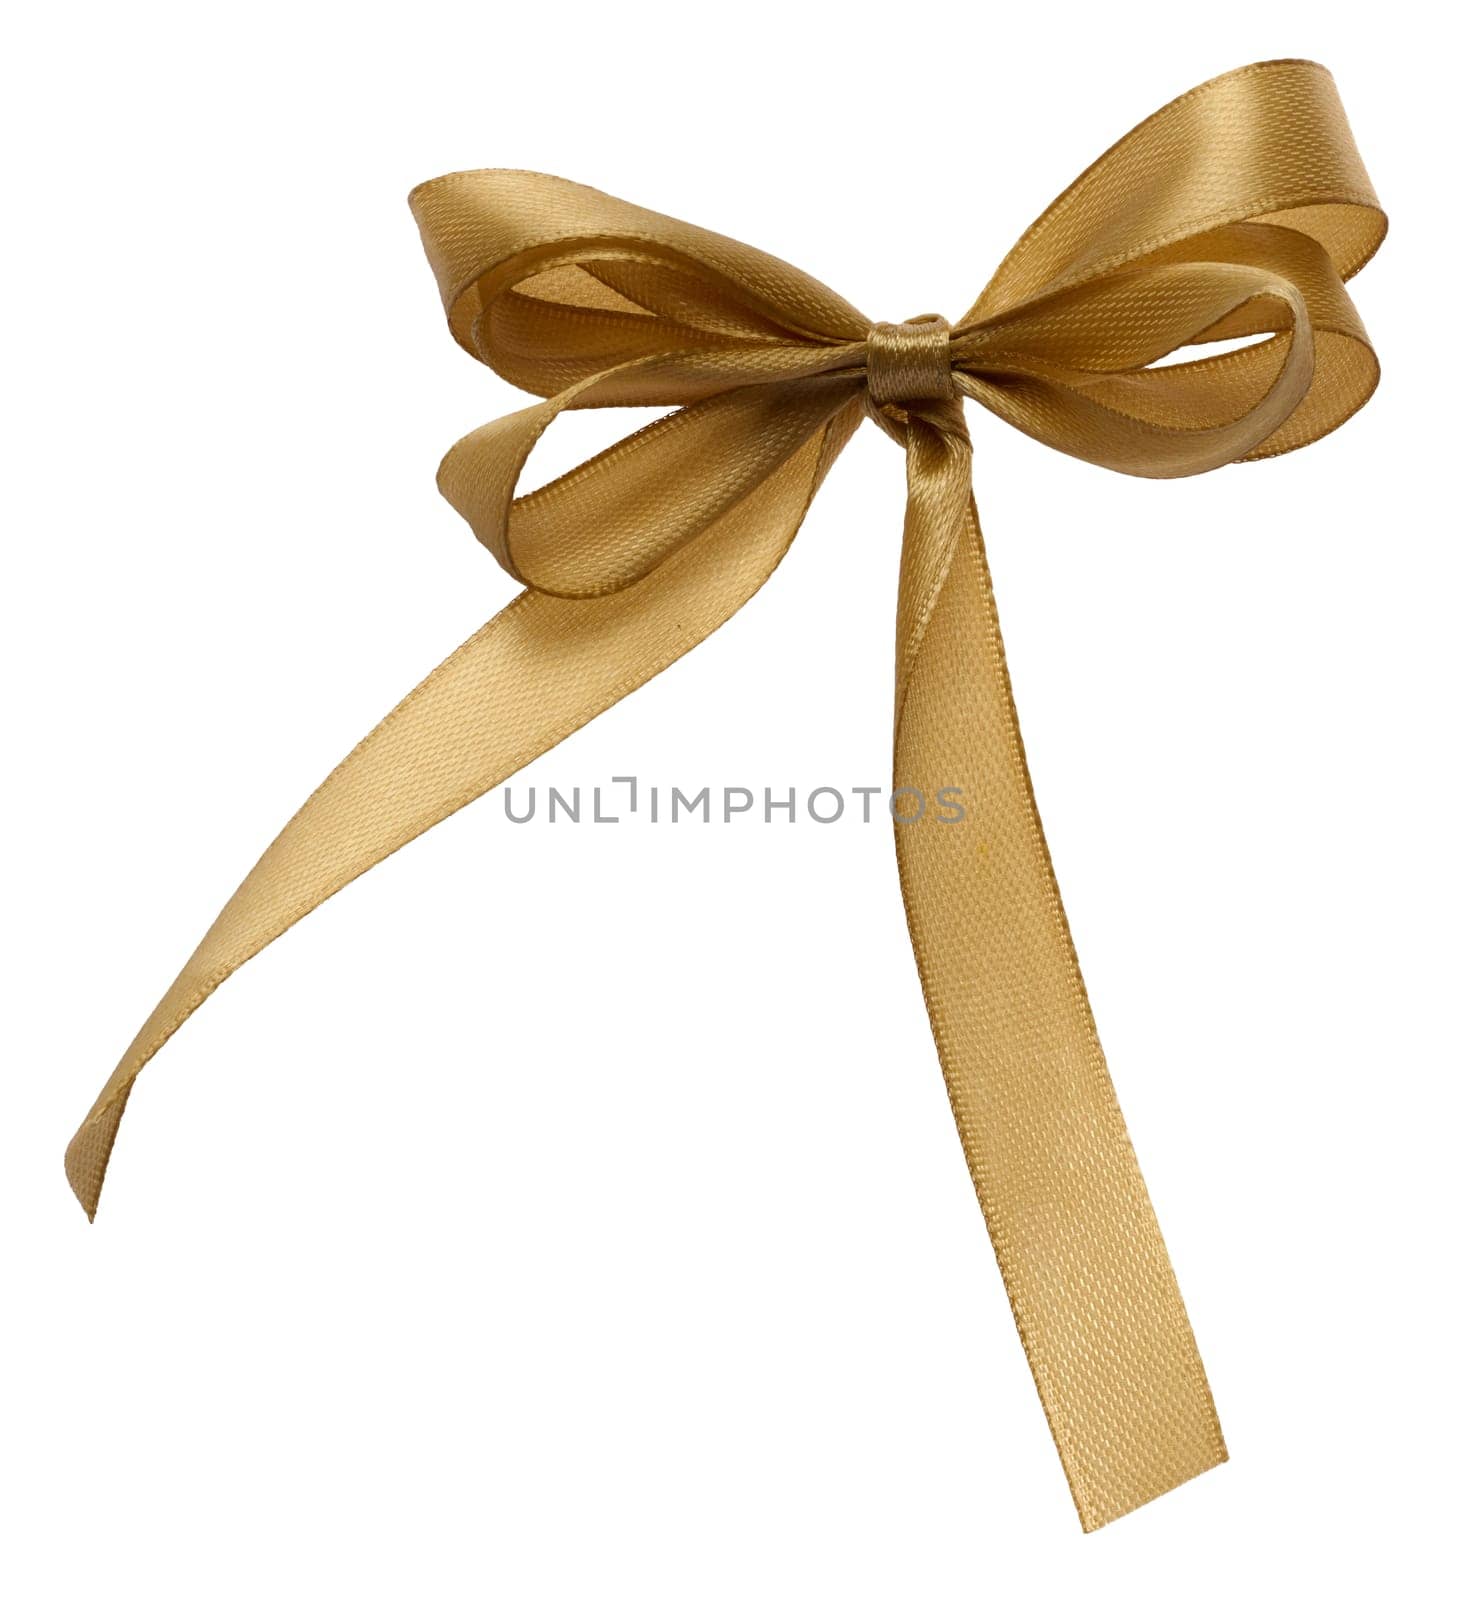 Tied bow made of golden silk ribbon on an isolated background by ndanko